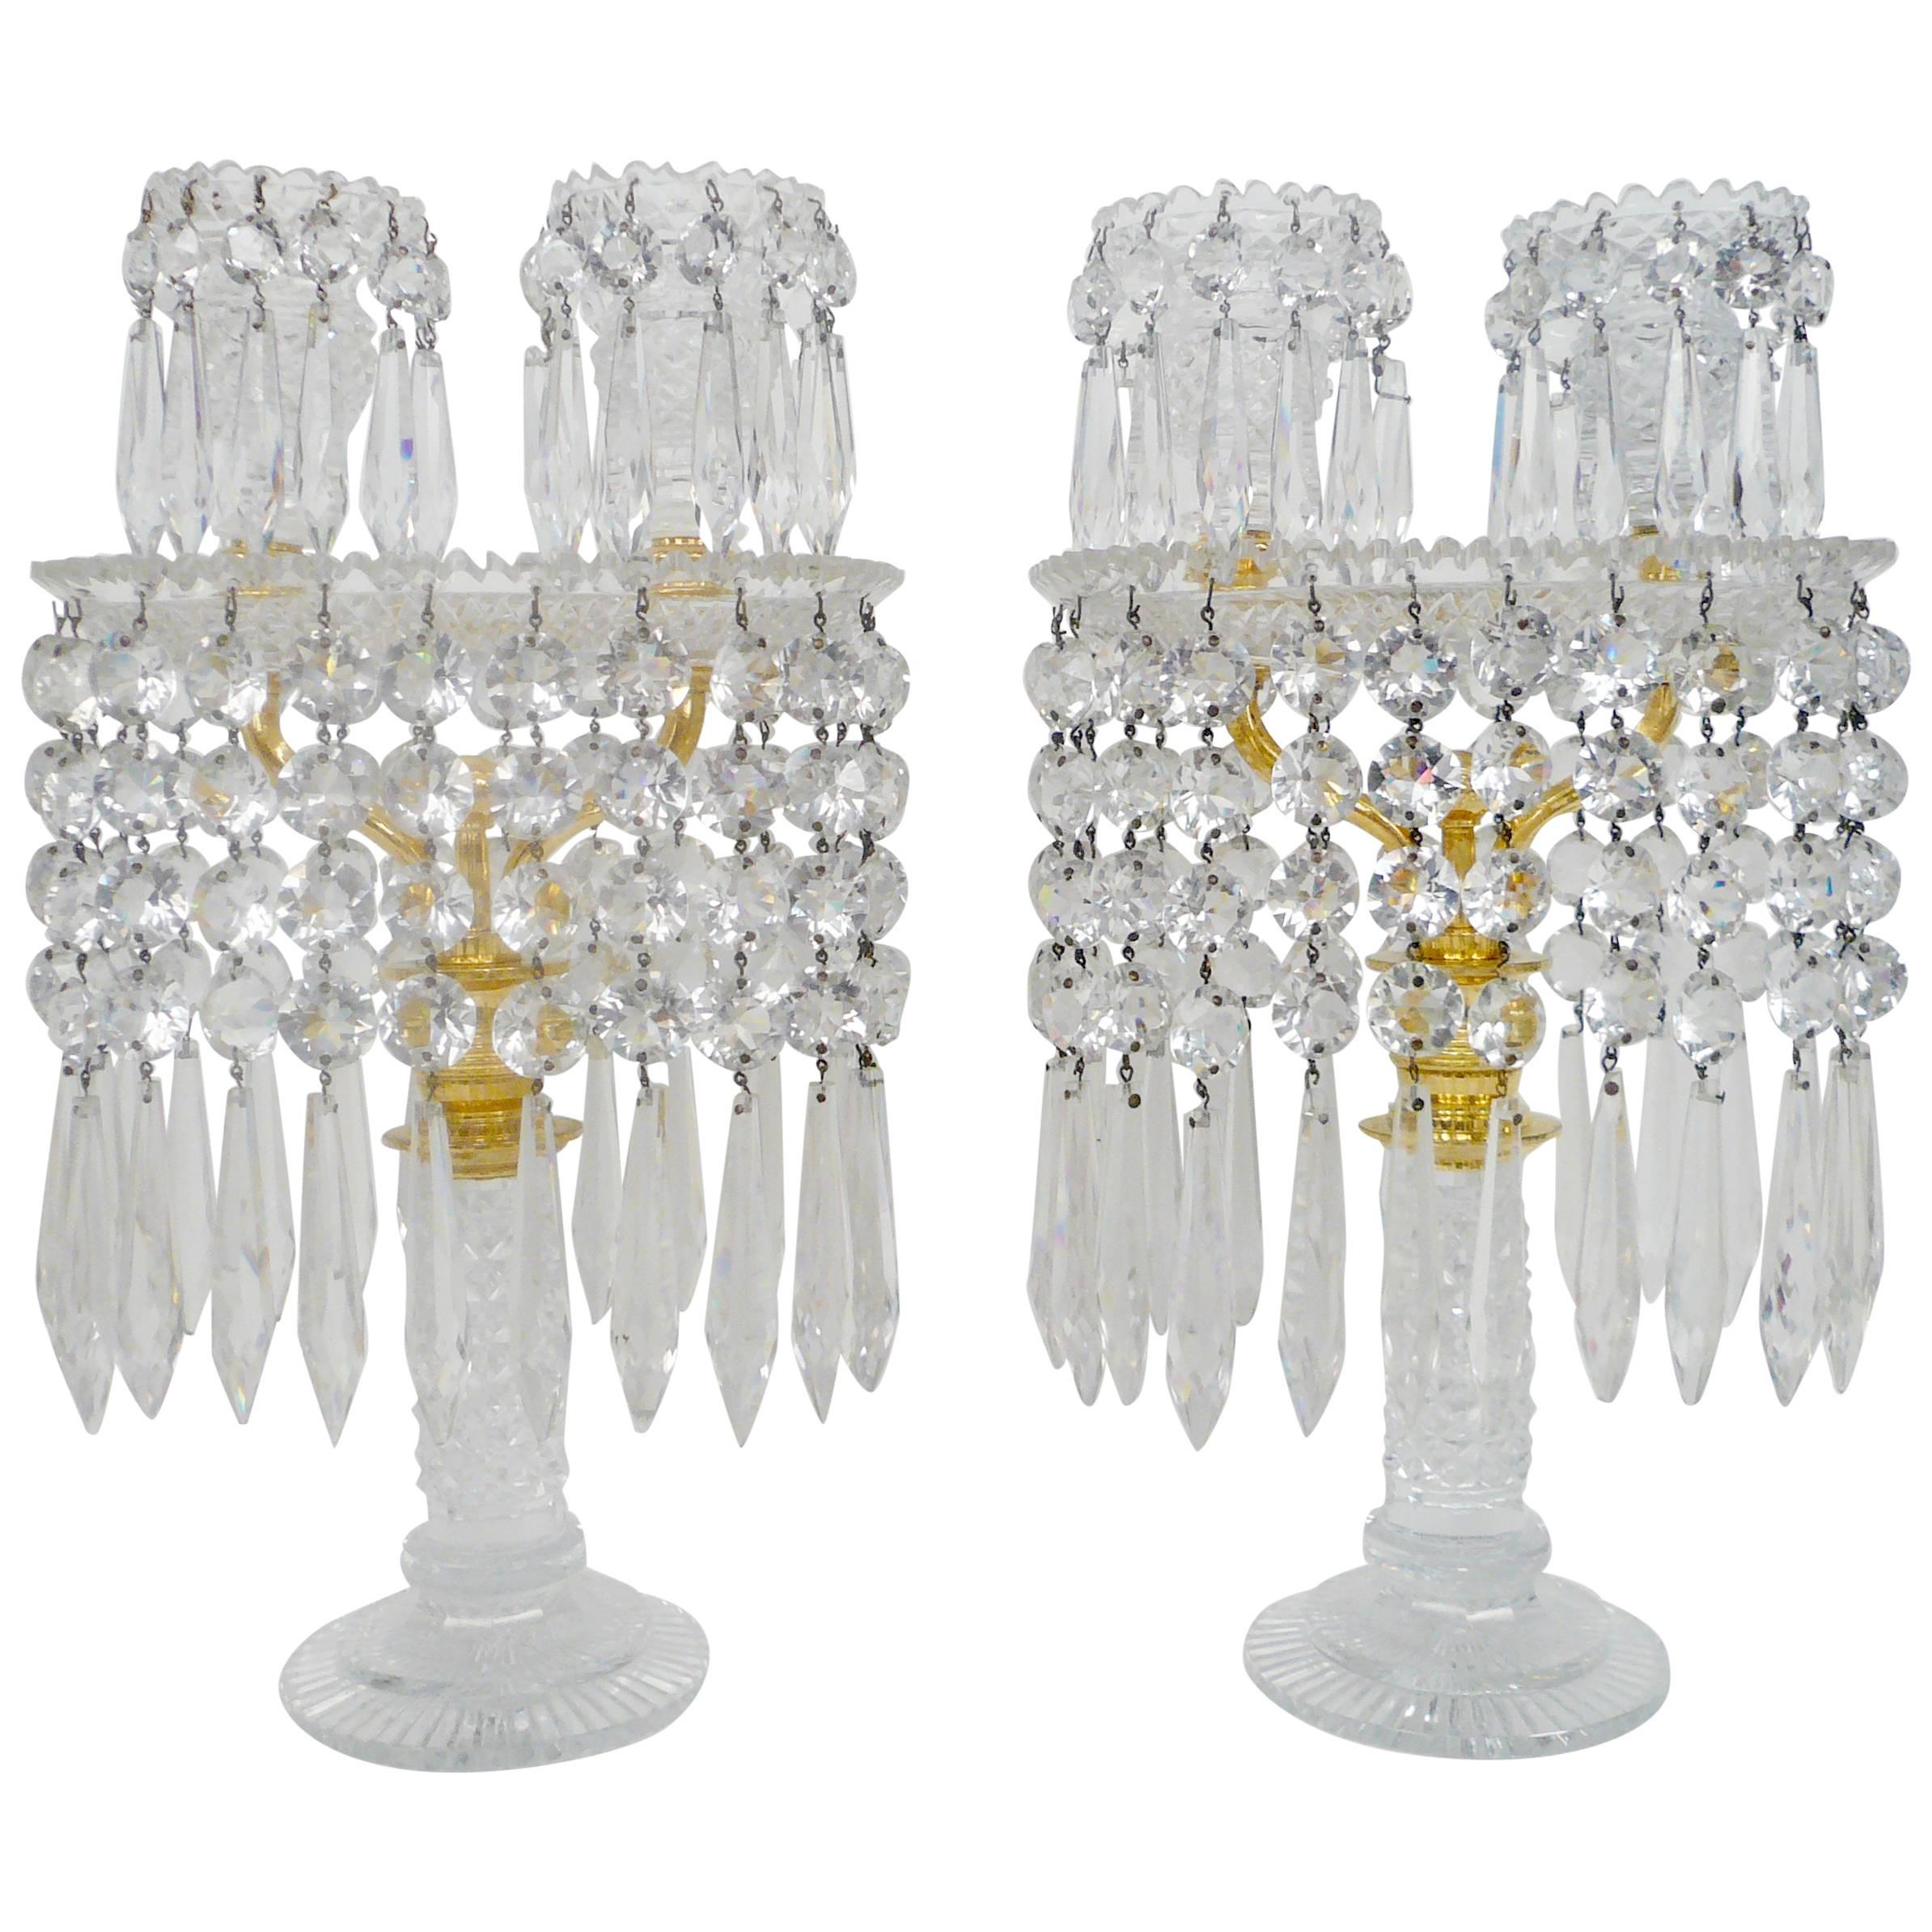 Pair of English Regency Cut Glass Candelabra, Attributed to John Blades For Sale